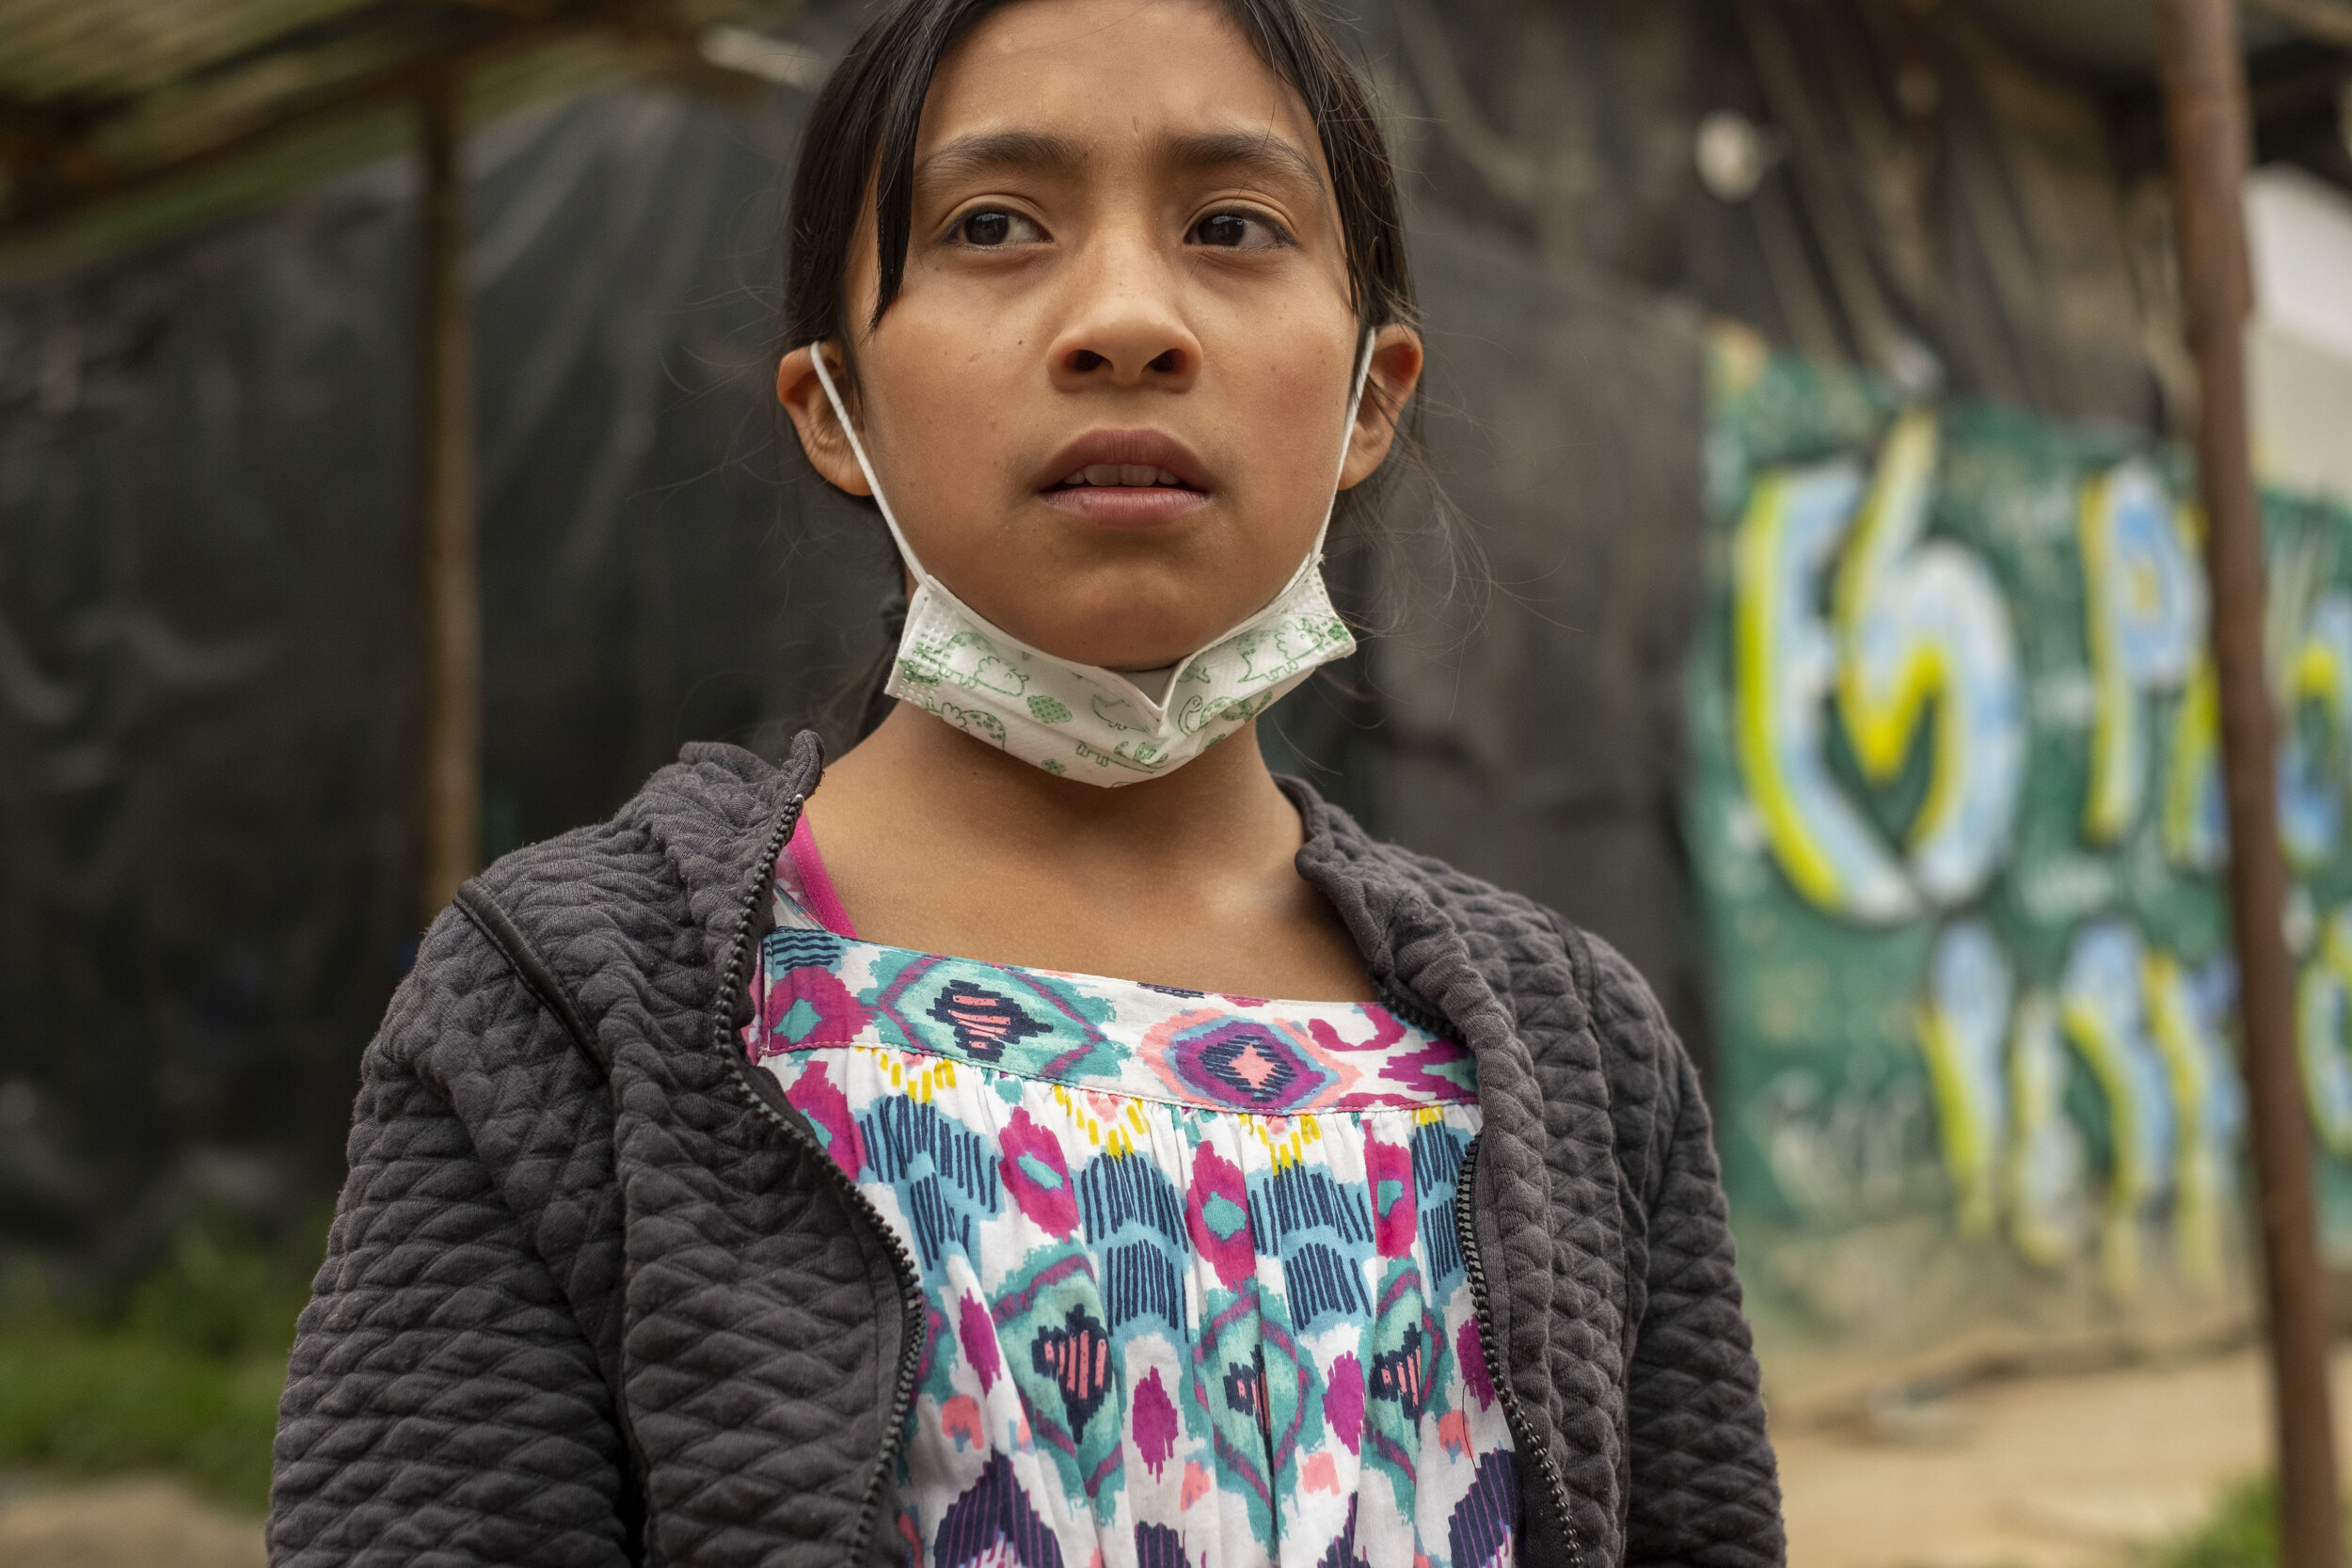  A young girl waits outside of a youth support foundation in Ciudad Bolivar, Bogotá.  